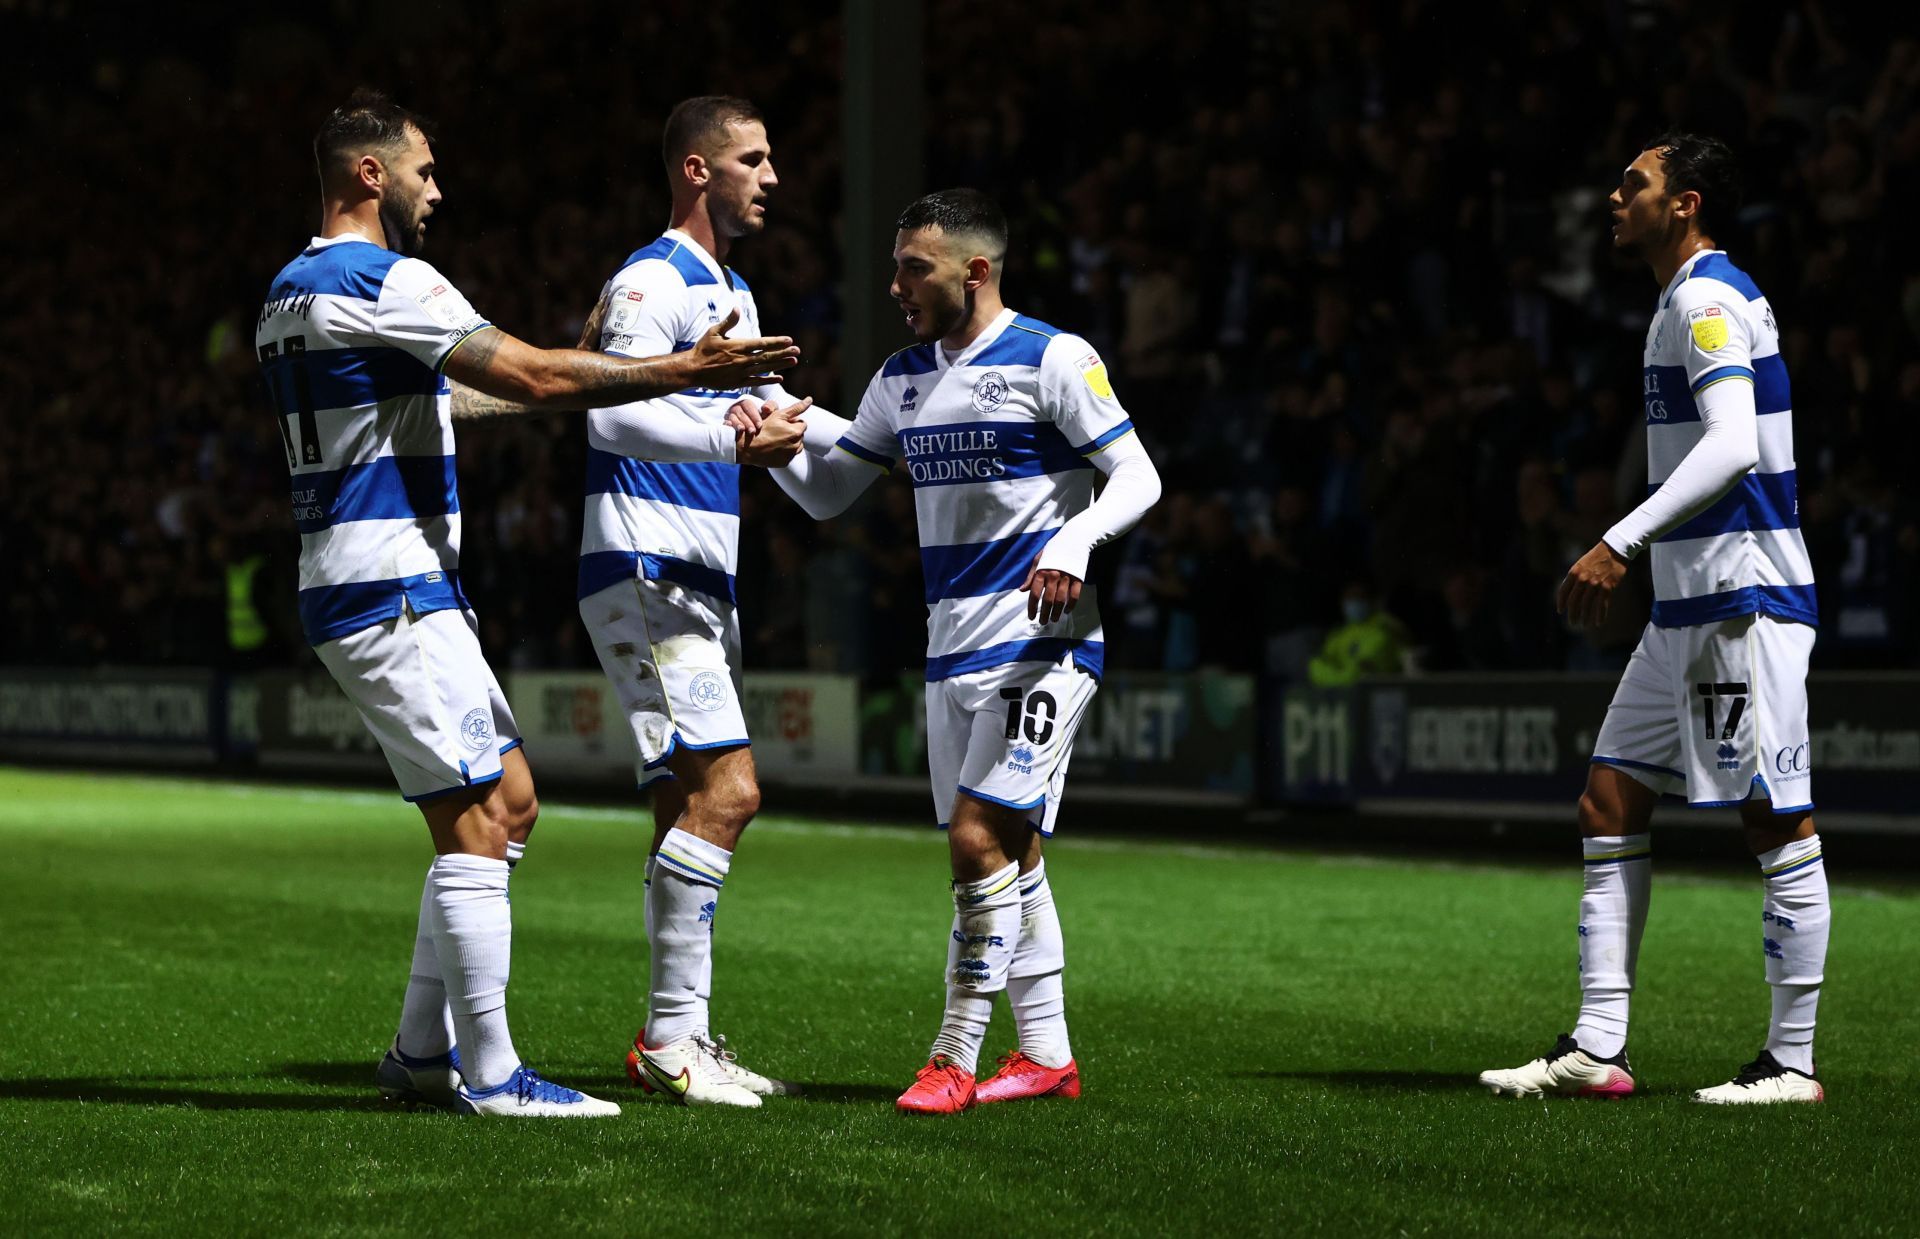 QPR will be looking to get back to winning ways